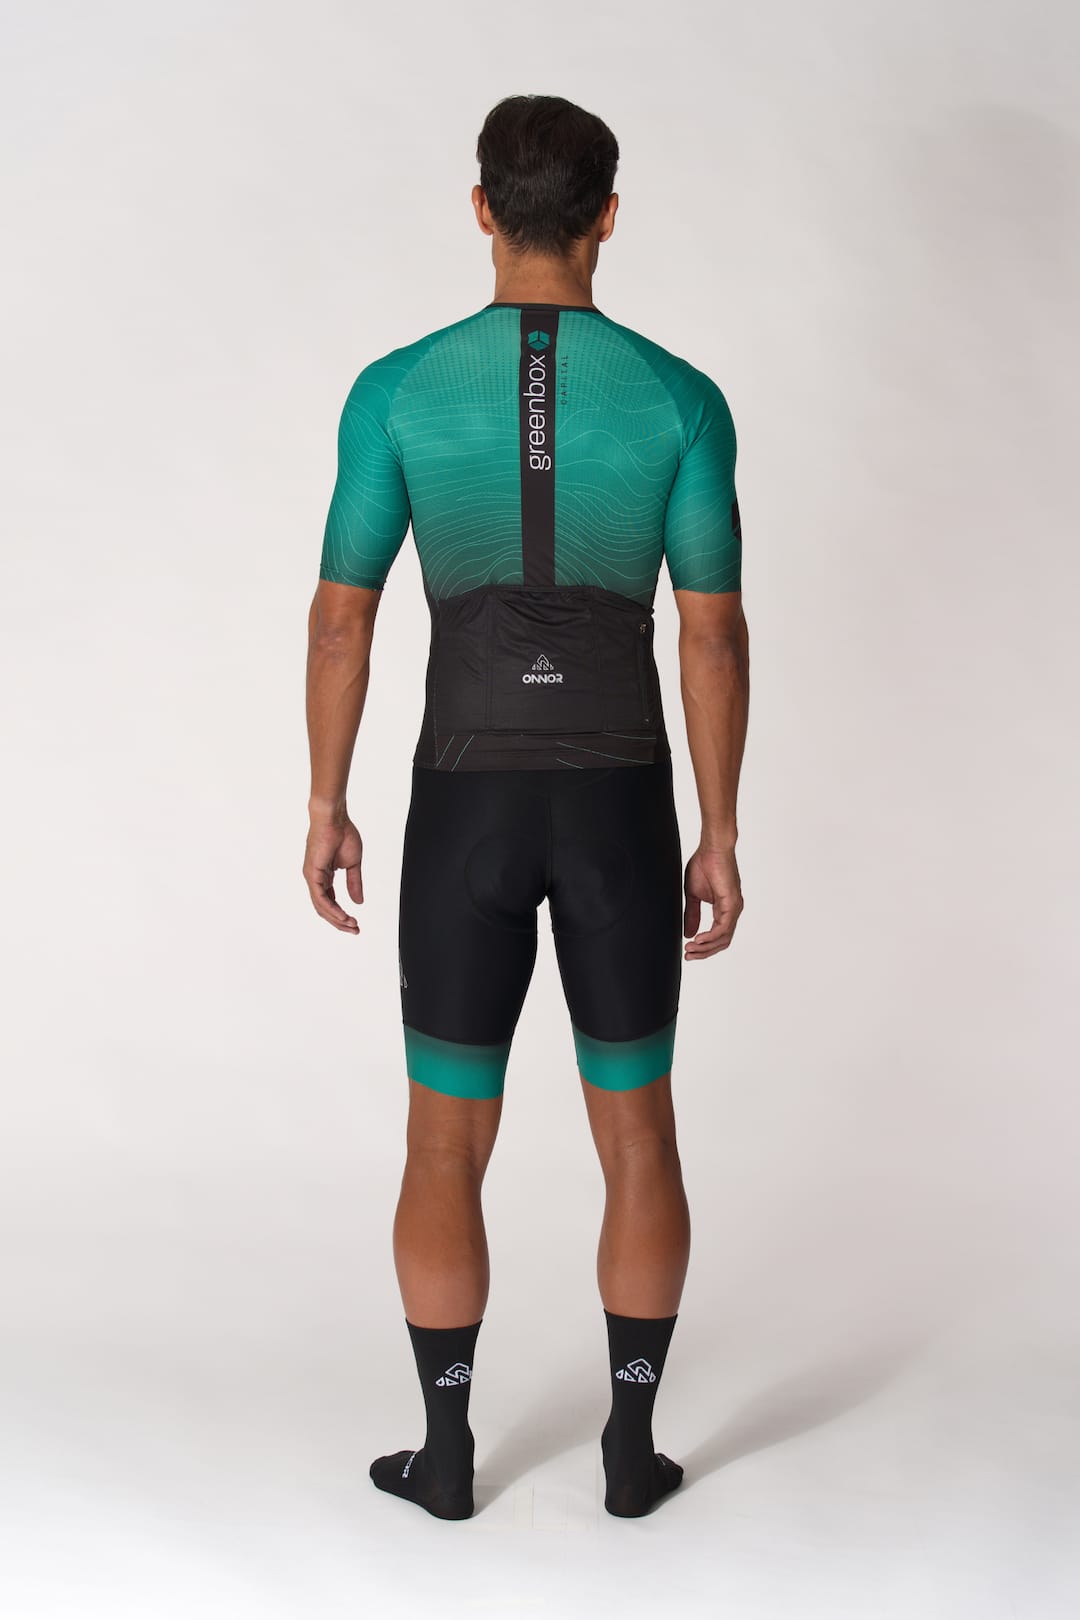 Tailored Cycling Jerseys with No Minimum Quantity